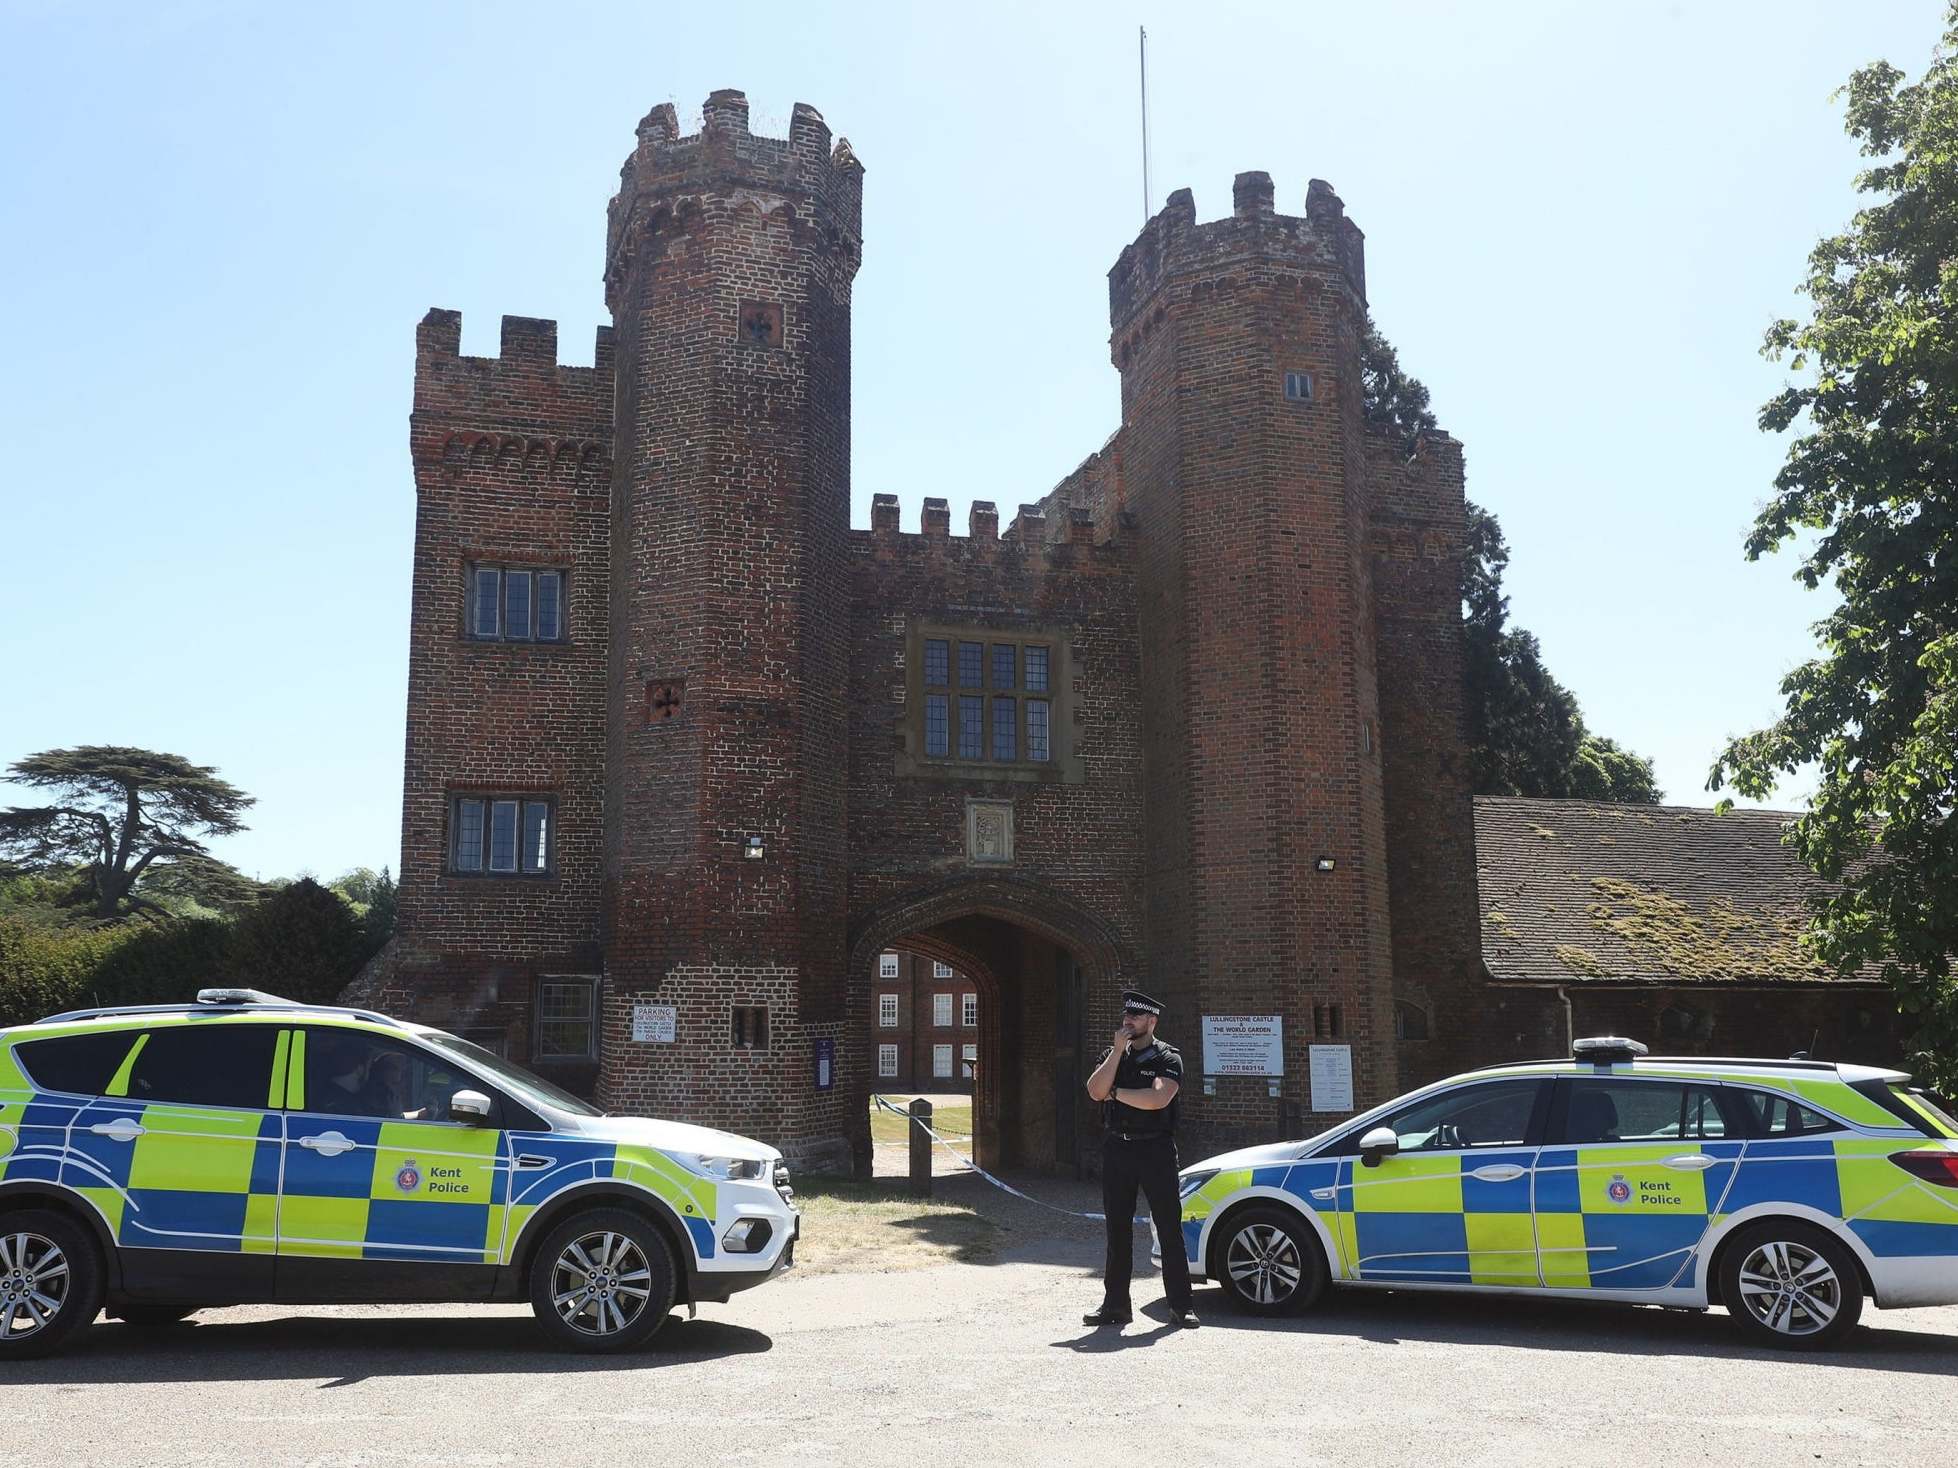 Police presence at the entrance to Lullingstone Castle in Eynsford, Kent, where a man has died after reports of a disturbance in the grounds